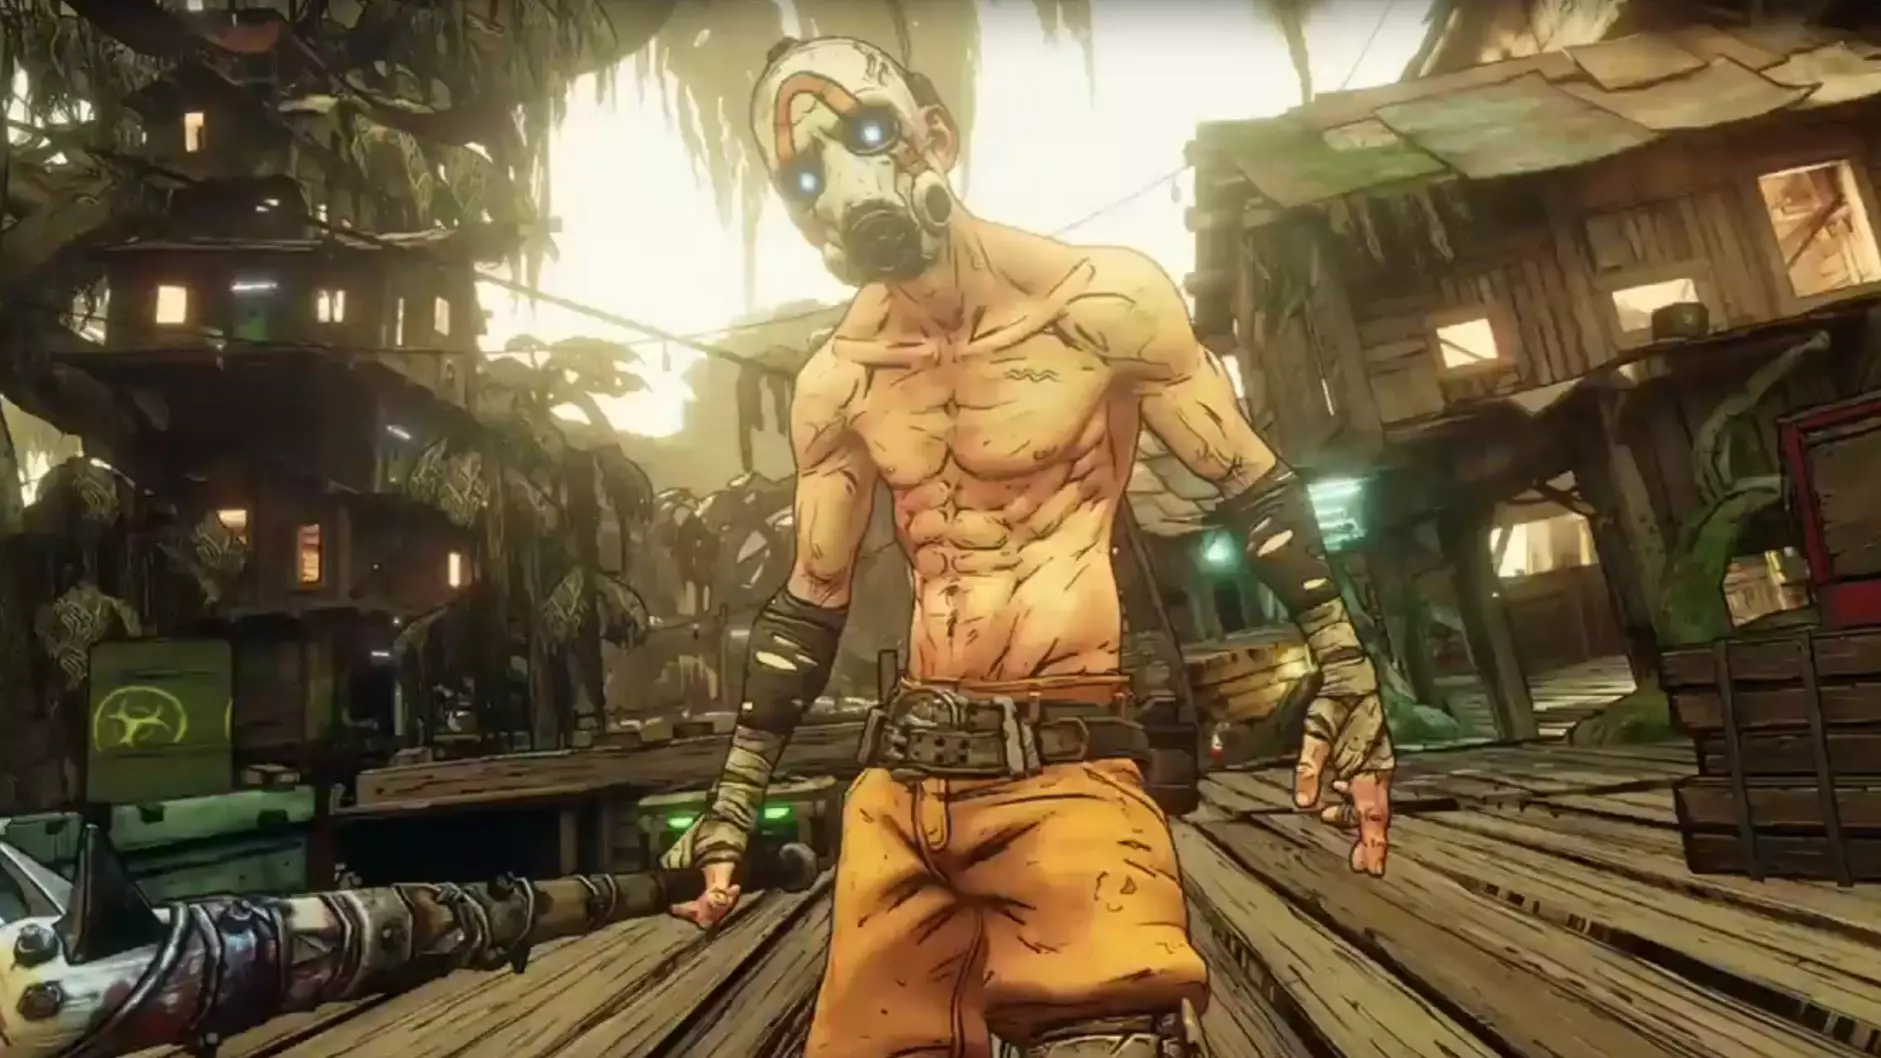 The Borderlands 3 reveal trailer made clear psychos are back in force